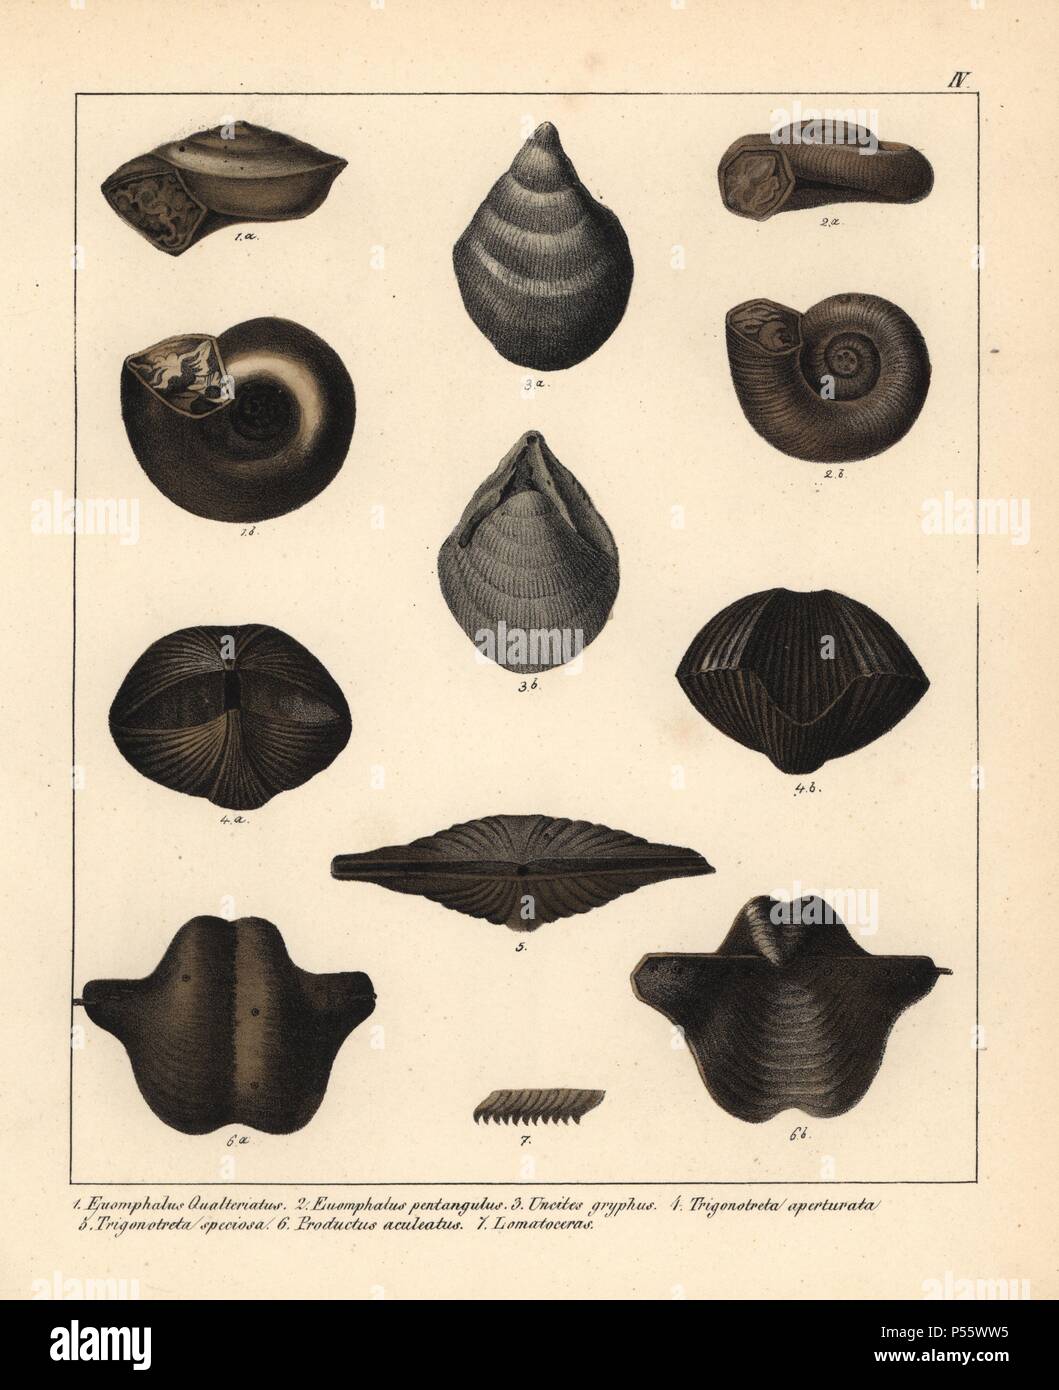 Fossils of extinct sea snails or the Silurian to Permian eras: Euomphalus qualteriatus; Euomphalus pentagulus; Uncites gryphus; Trigonotreta aperturata; Trigonotreta speciosa; Productus aculeatus; and Lomatoceras. Handcoloured lithograph by an unknown artist from Dr. F.A. Schmidt's 'Petrefactenbuch,' published in Stuttgart, Germany, 1855 by Verlag von Krais & Hoffmann. Dr. Schmidt's 'Book of Petrification' introduced fossils and palaeontology to both the specialist and general reader. Stock Photo